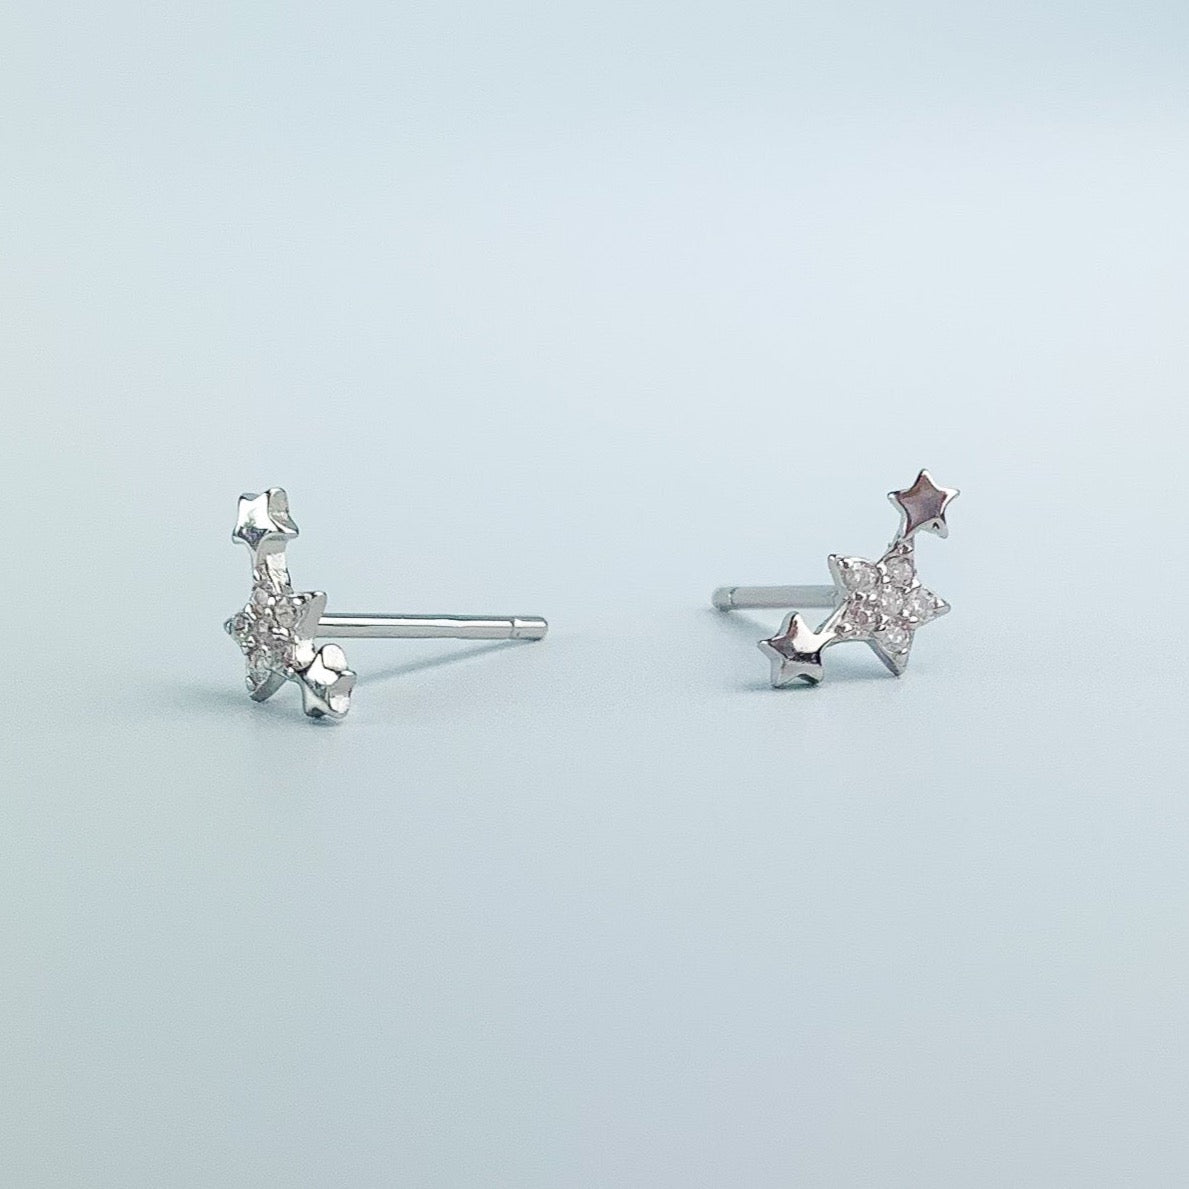 Tiny Star Constellation Earrings